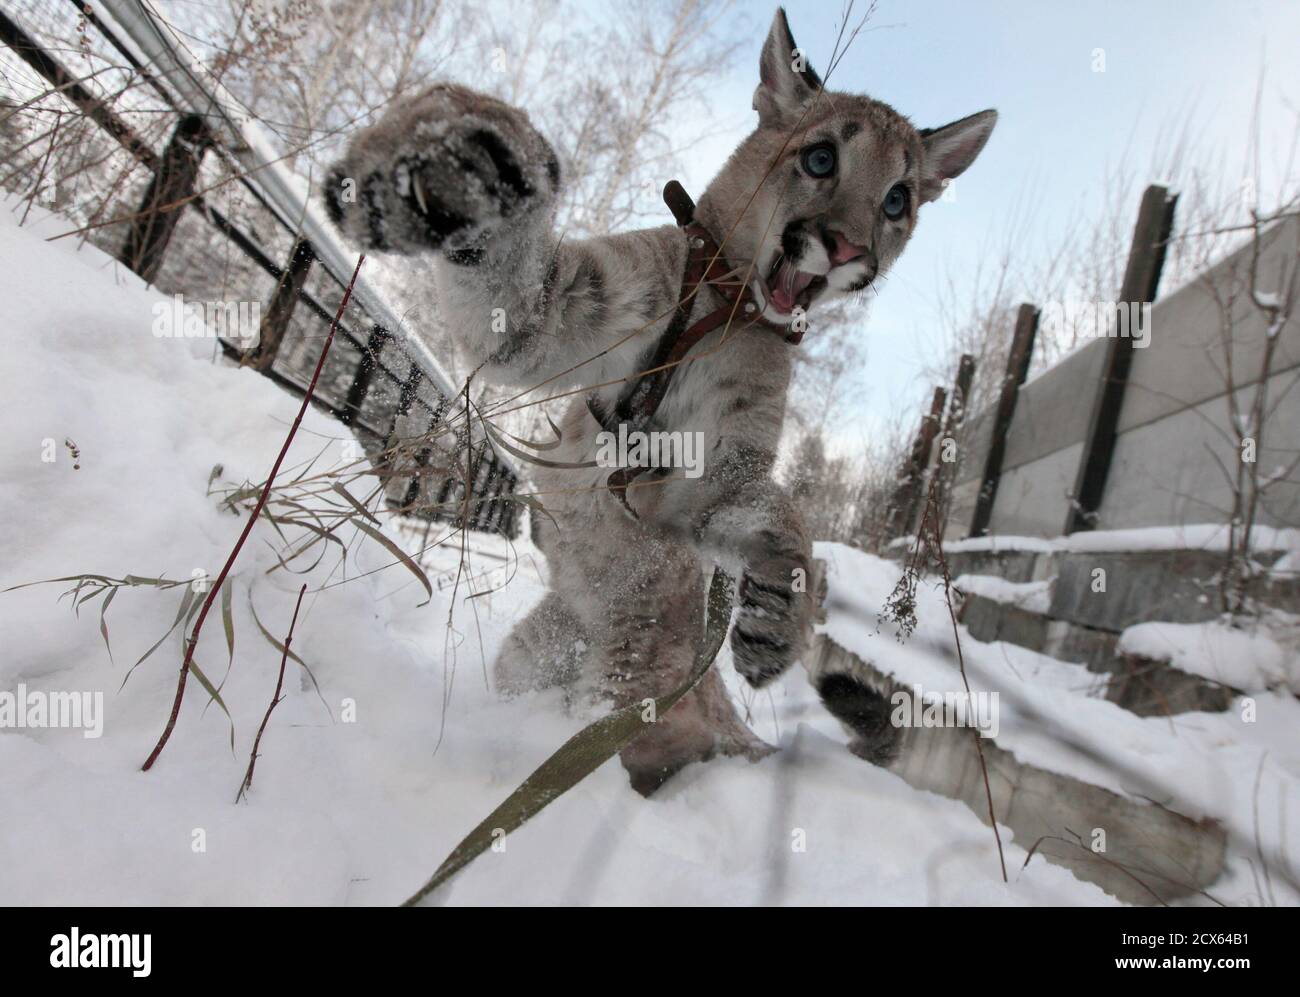 Ice, a 5-month-old North American Puma female cub, plays in the snow at the  Royev Ruchey zoo in a suburb of Russia's Siberian city of Krasnoyarsk  November 20, 2012. REUTERS/Ilya Naymushin (RUSSIA -